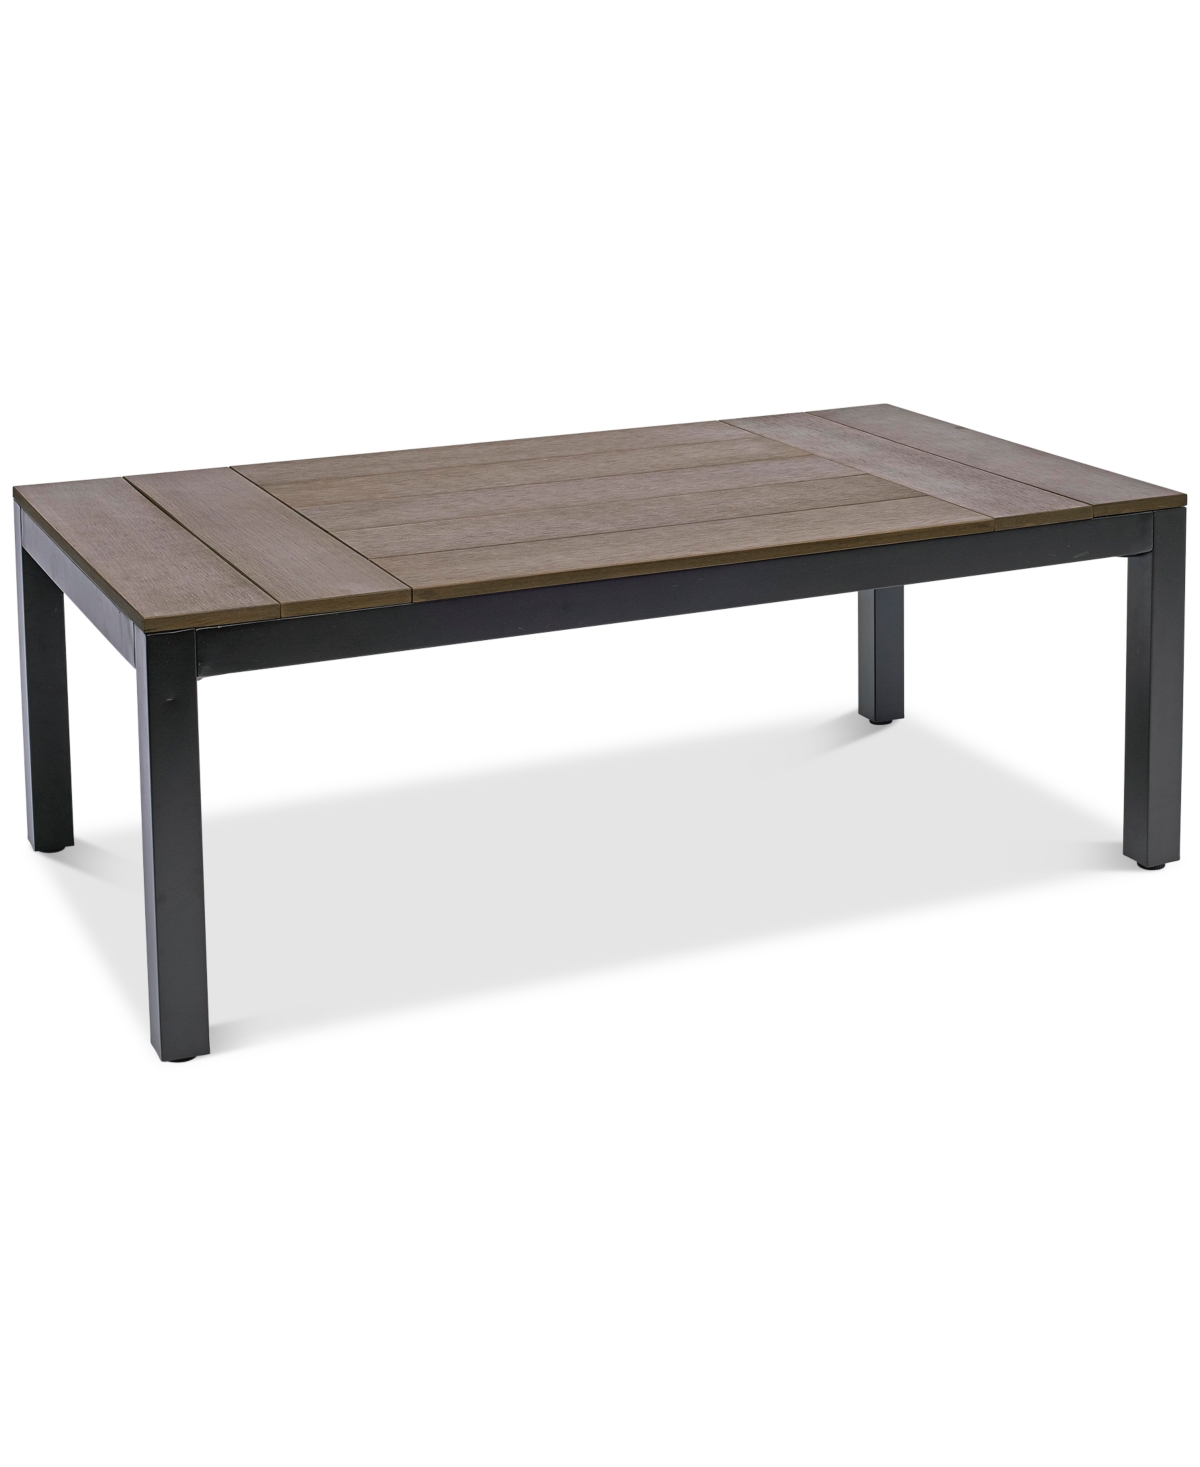 10404141 Stockholm Outdoor Coffee Table, Created for Macys sku 10404141